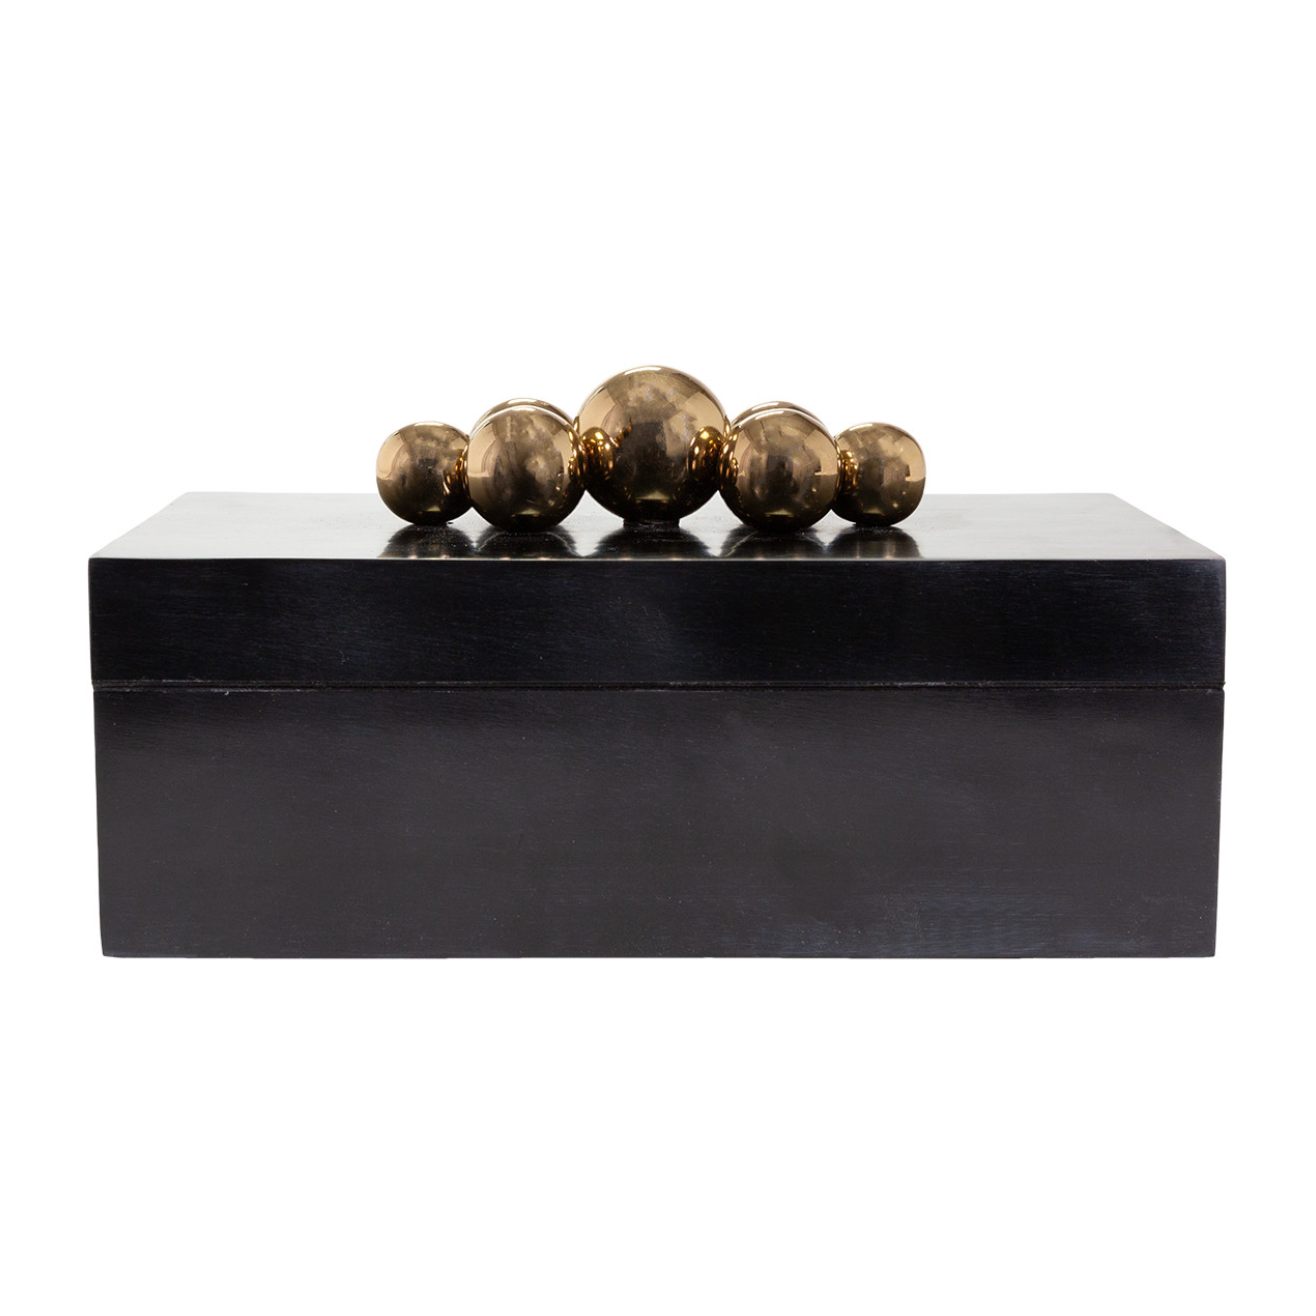 A rectangular, black wooden Hardin Box with a glossy finish, featuring a row of metallic gold balls as a decorative element on top, isolated on a white background in Scottsdale, Arizona. Made by The Import Collection.